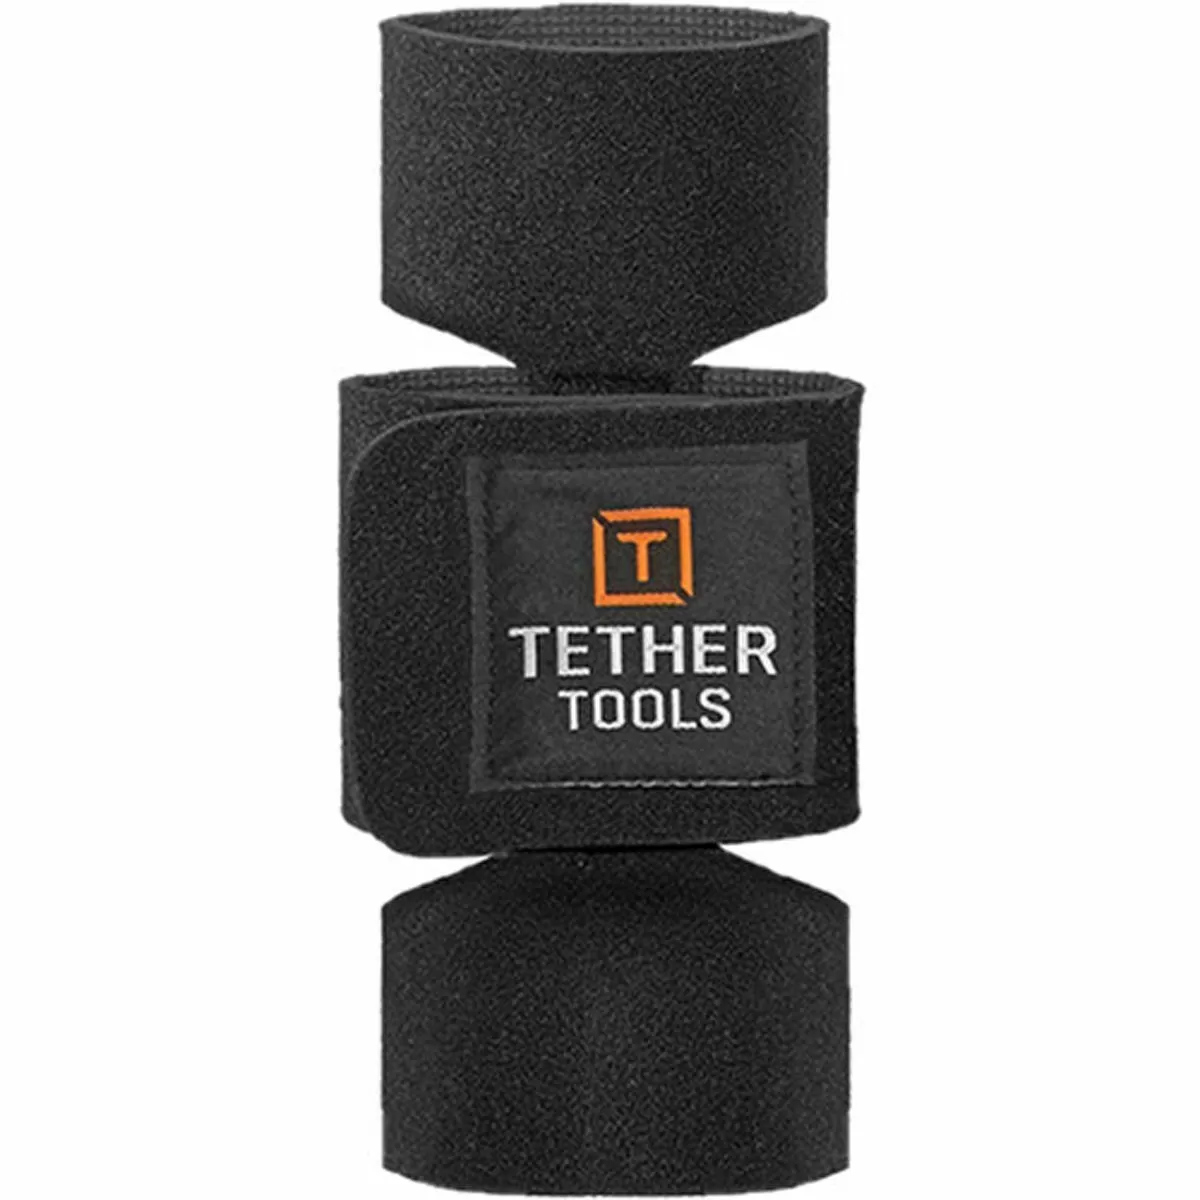 Tether Pro. Tether цена. Tether use Cases.